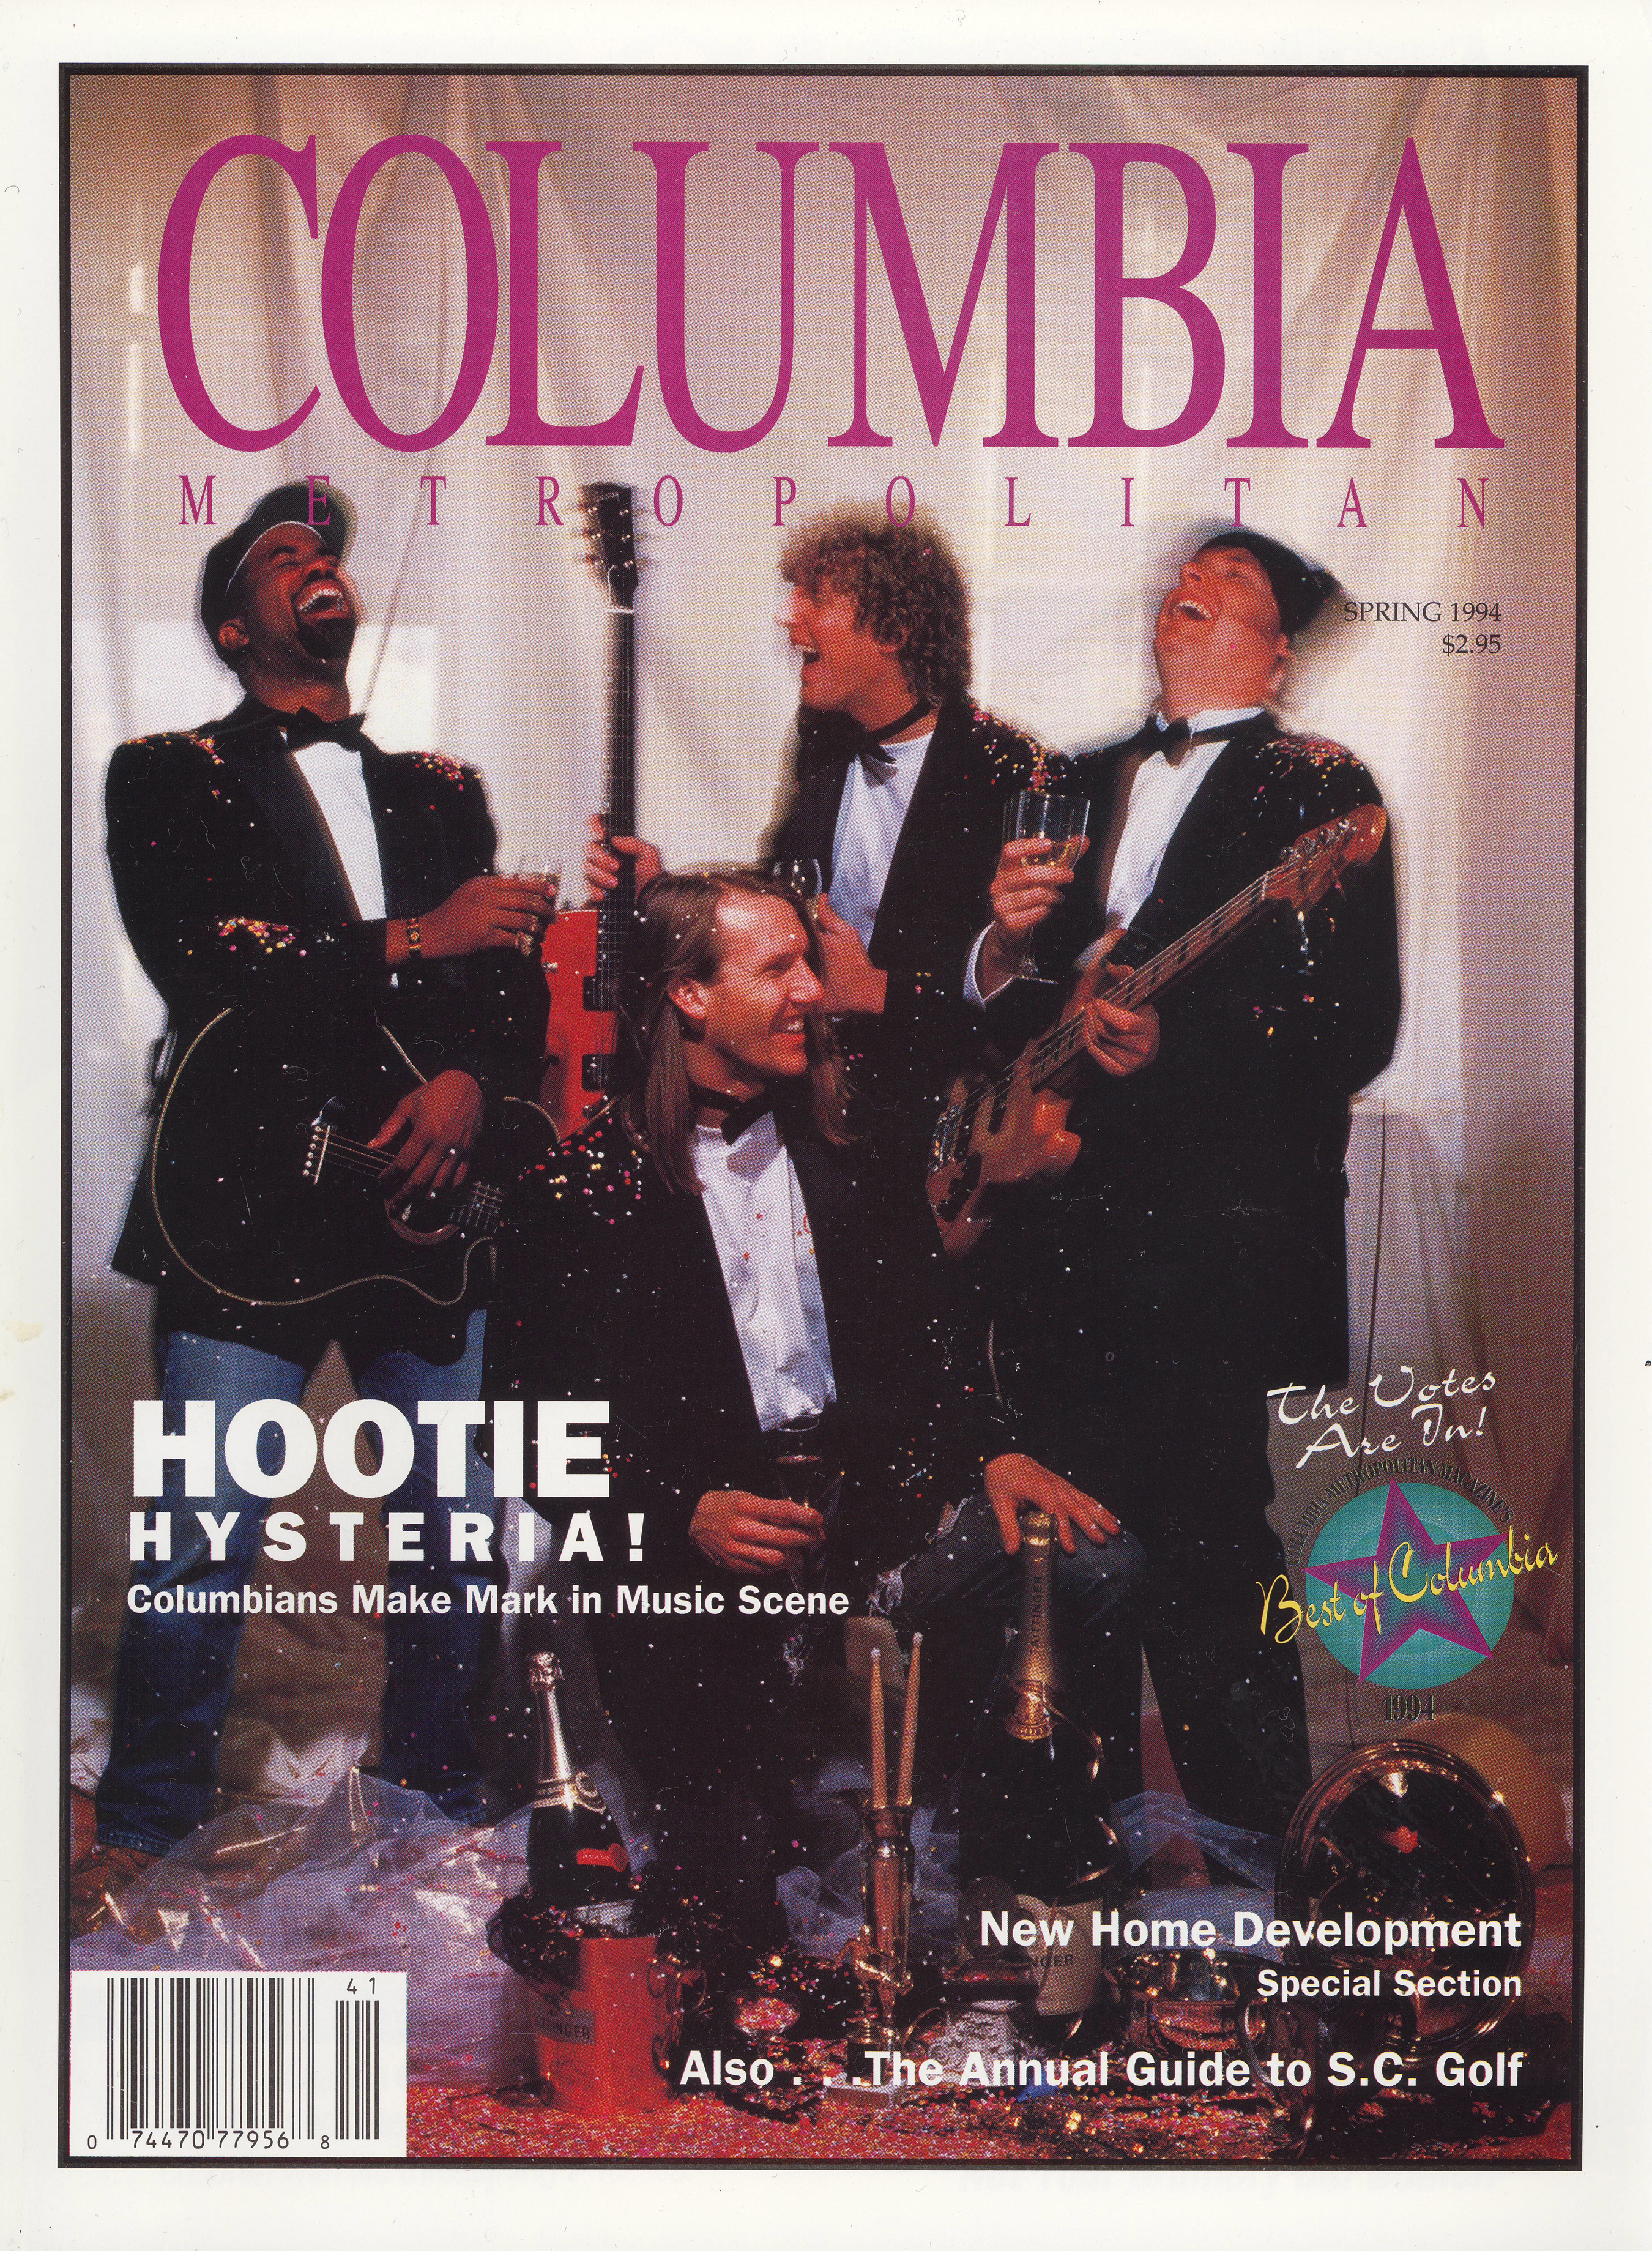  Spring 1994: Hootie and the Blowfish was voted Best Local Band in the 1994 CMM Best of Columbia contest. Darius Rucker, Soni Sonefeld, Mark Bryan, and Dean Felber posed for their first ever magazine cover for Columbia Metropolitan at Jeff Amberg’s Lady Street studio. Jeff says that after he left the studio in 1997, confetti that we threw during the photo shoot could still be found in between the cracks of the hardwood studio floor.